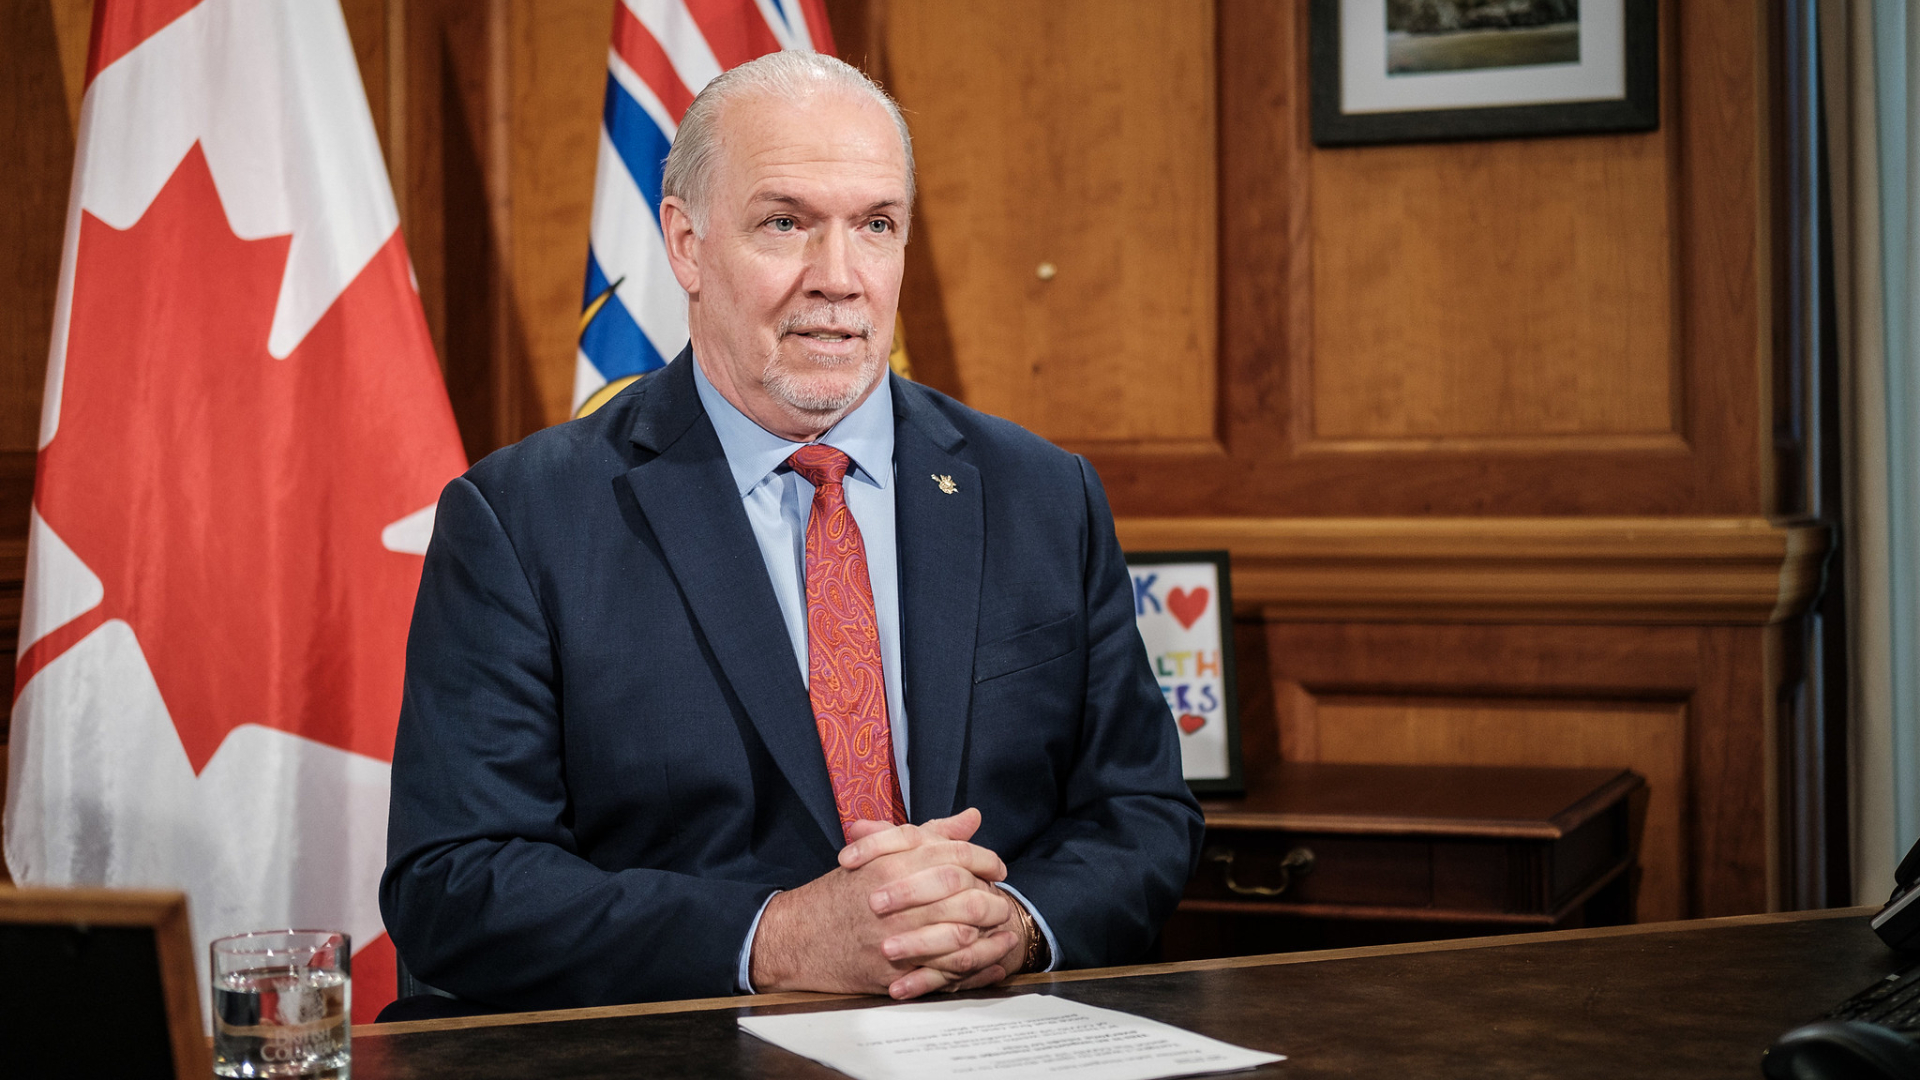 Premier Horgan Extends BC State Of Emergency , Tells British Columbians To Continue Isolating In TV Address